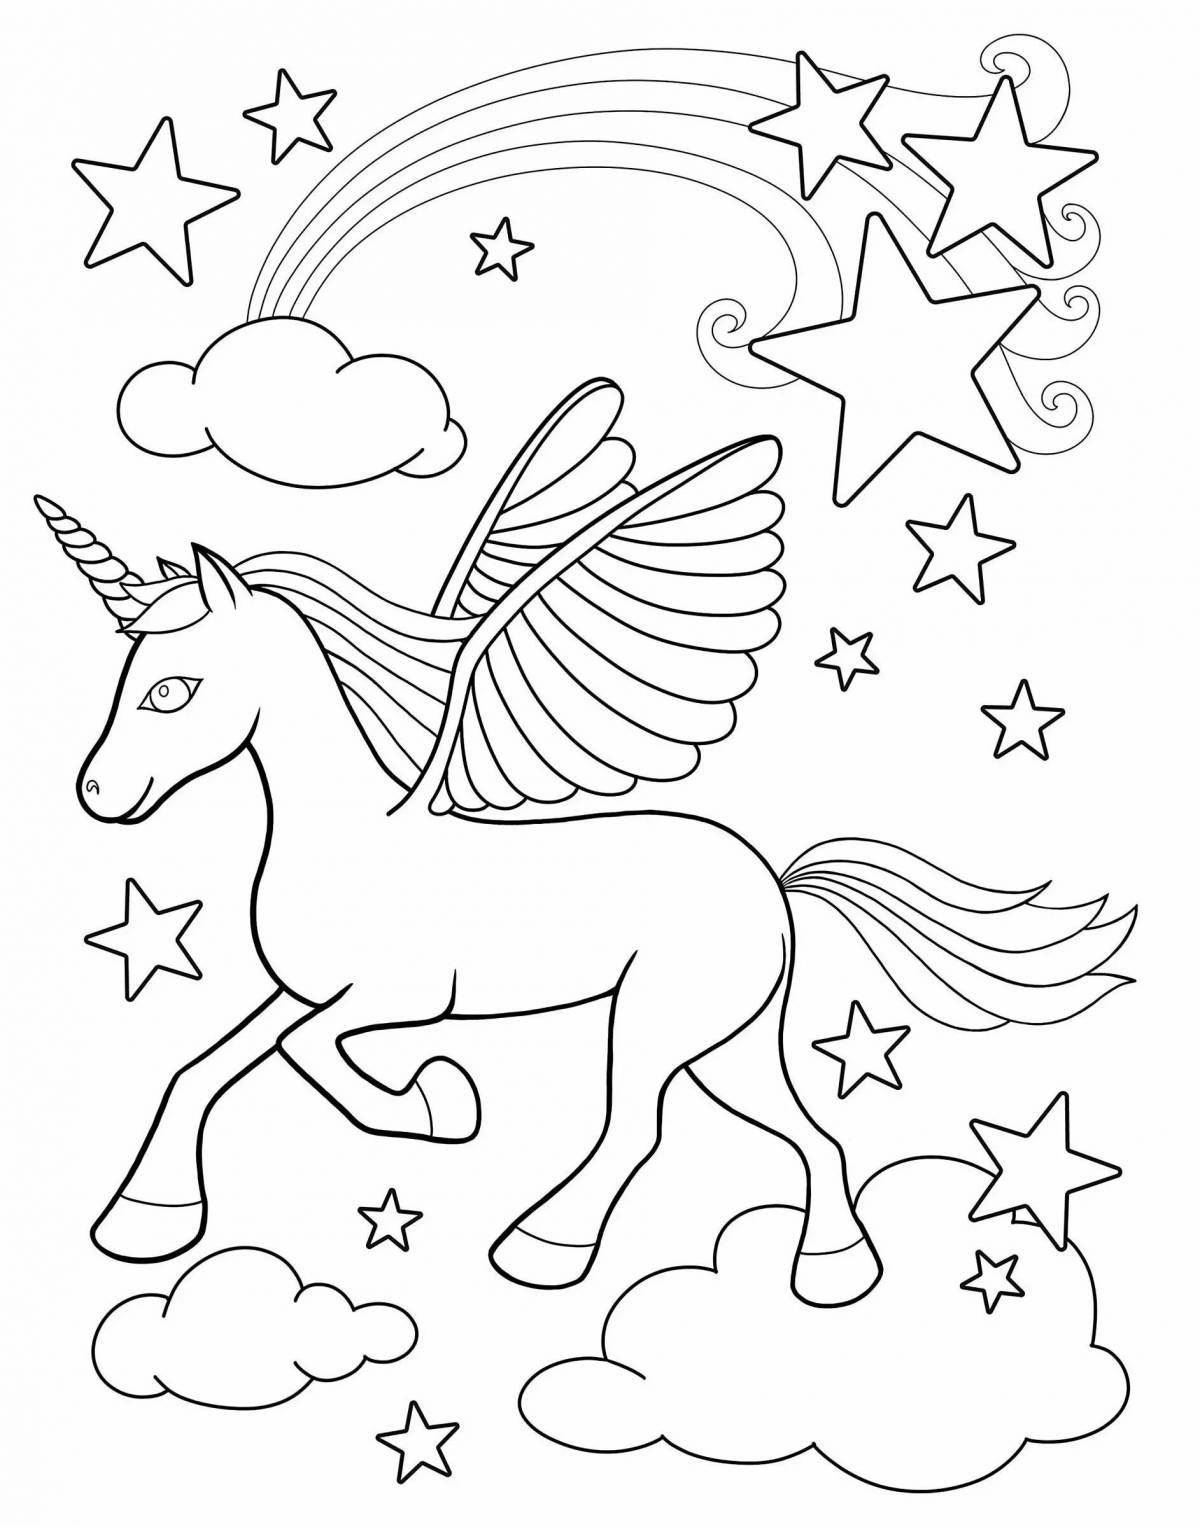 Adorable unicorn coloring book for 5 year old girls